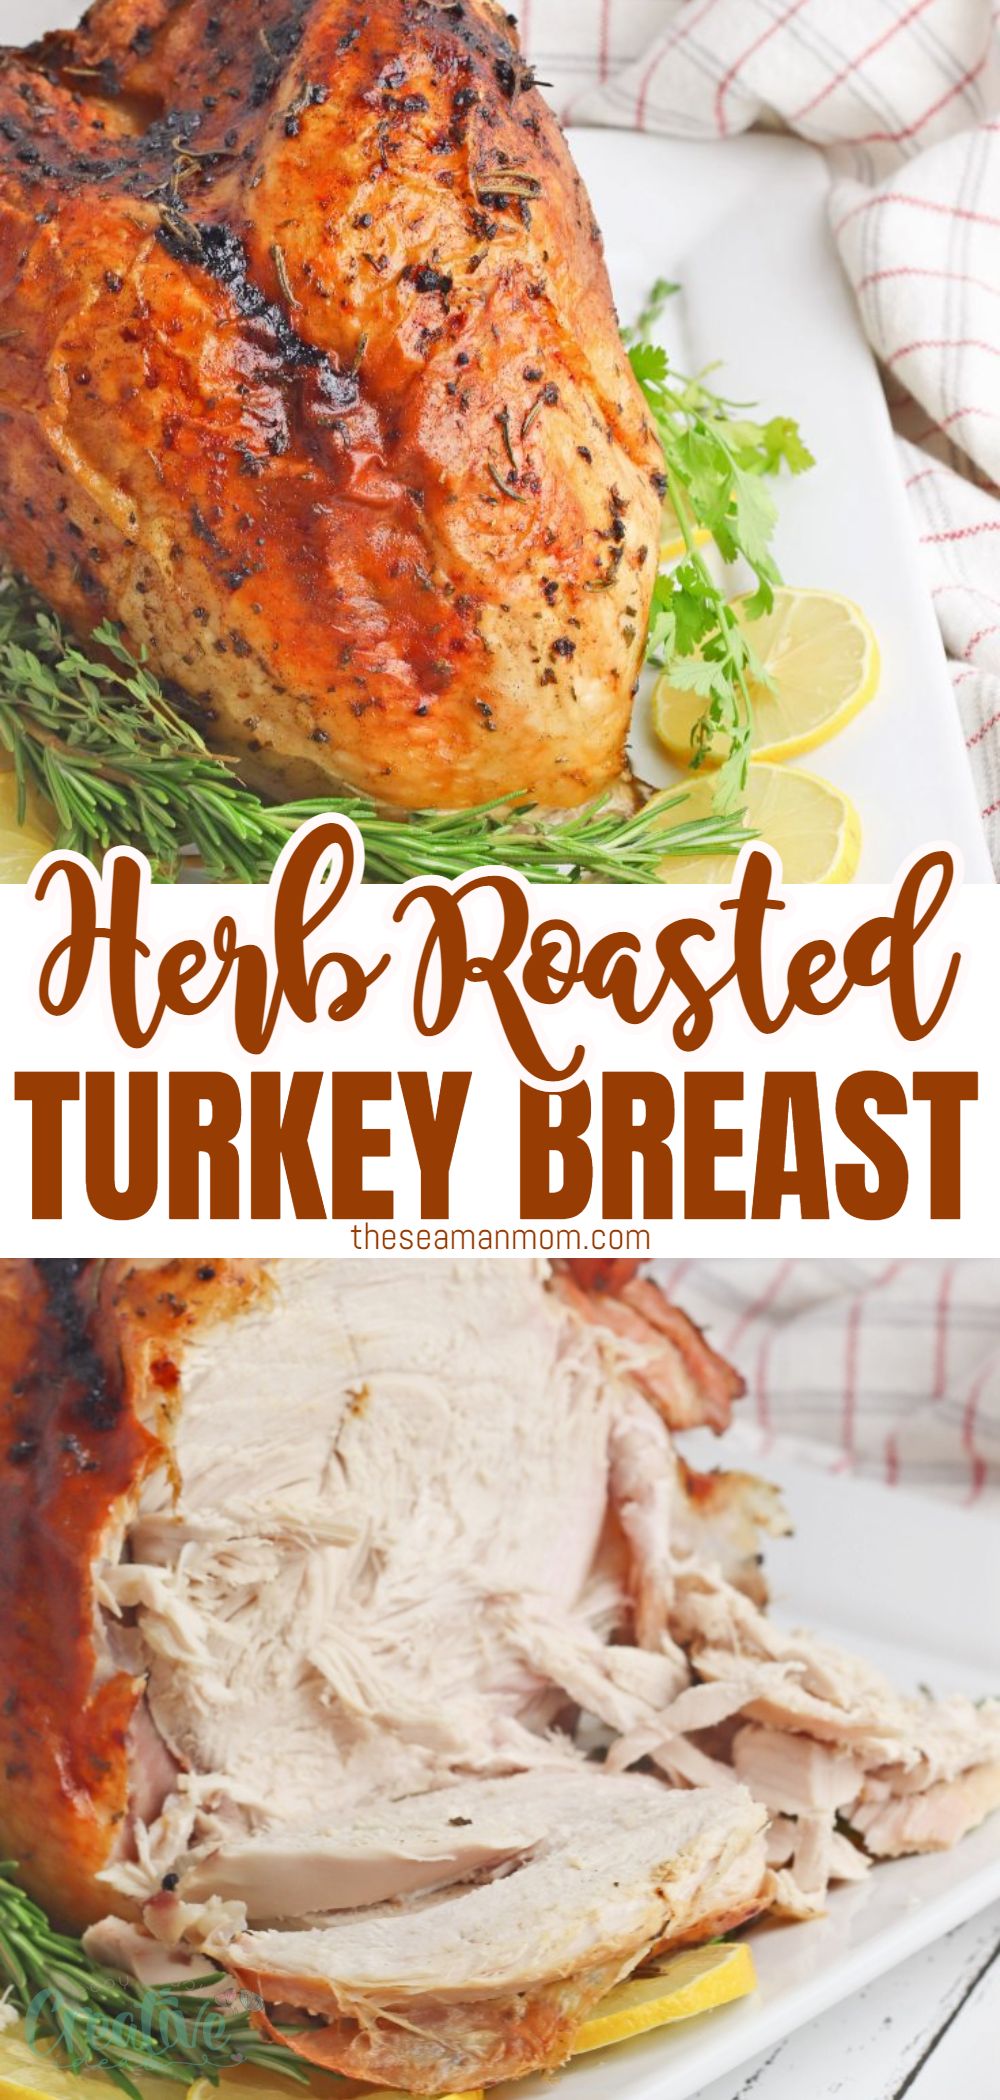 Baked in the oven with lemon, garlic and herbs, this delicious and easy to cook herb roasted turkey breast is a flavorful idea for Thanksgiving as well as Christmas! Making this oven roasted turkey breast is a great option for smaller families! via @petroneagu